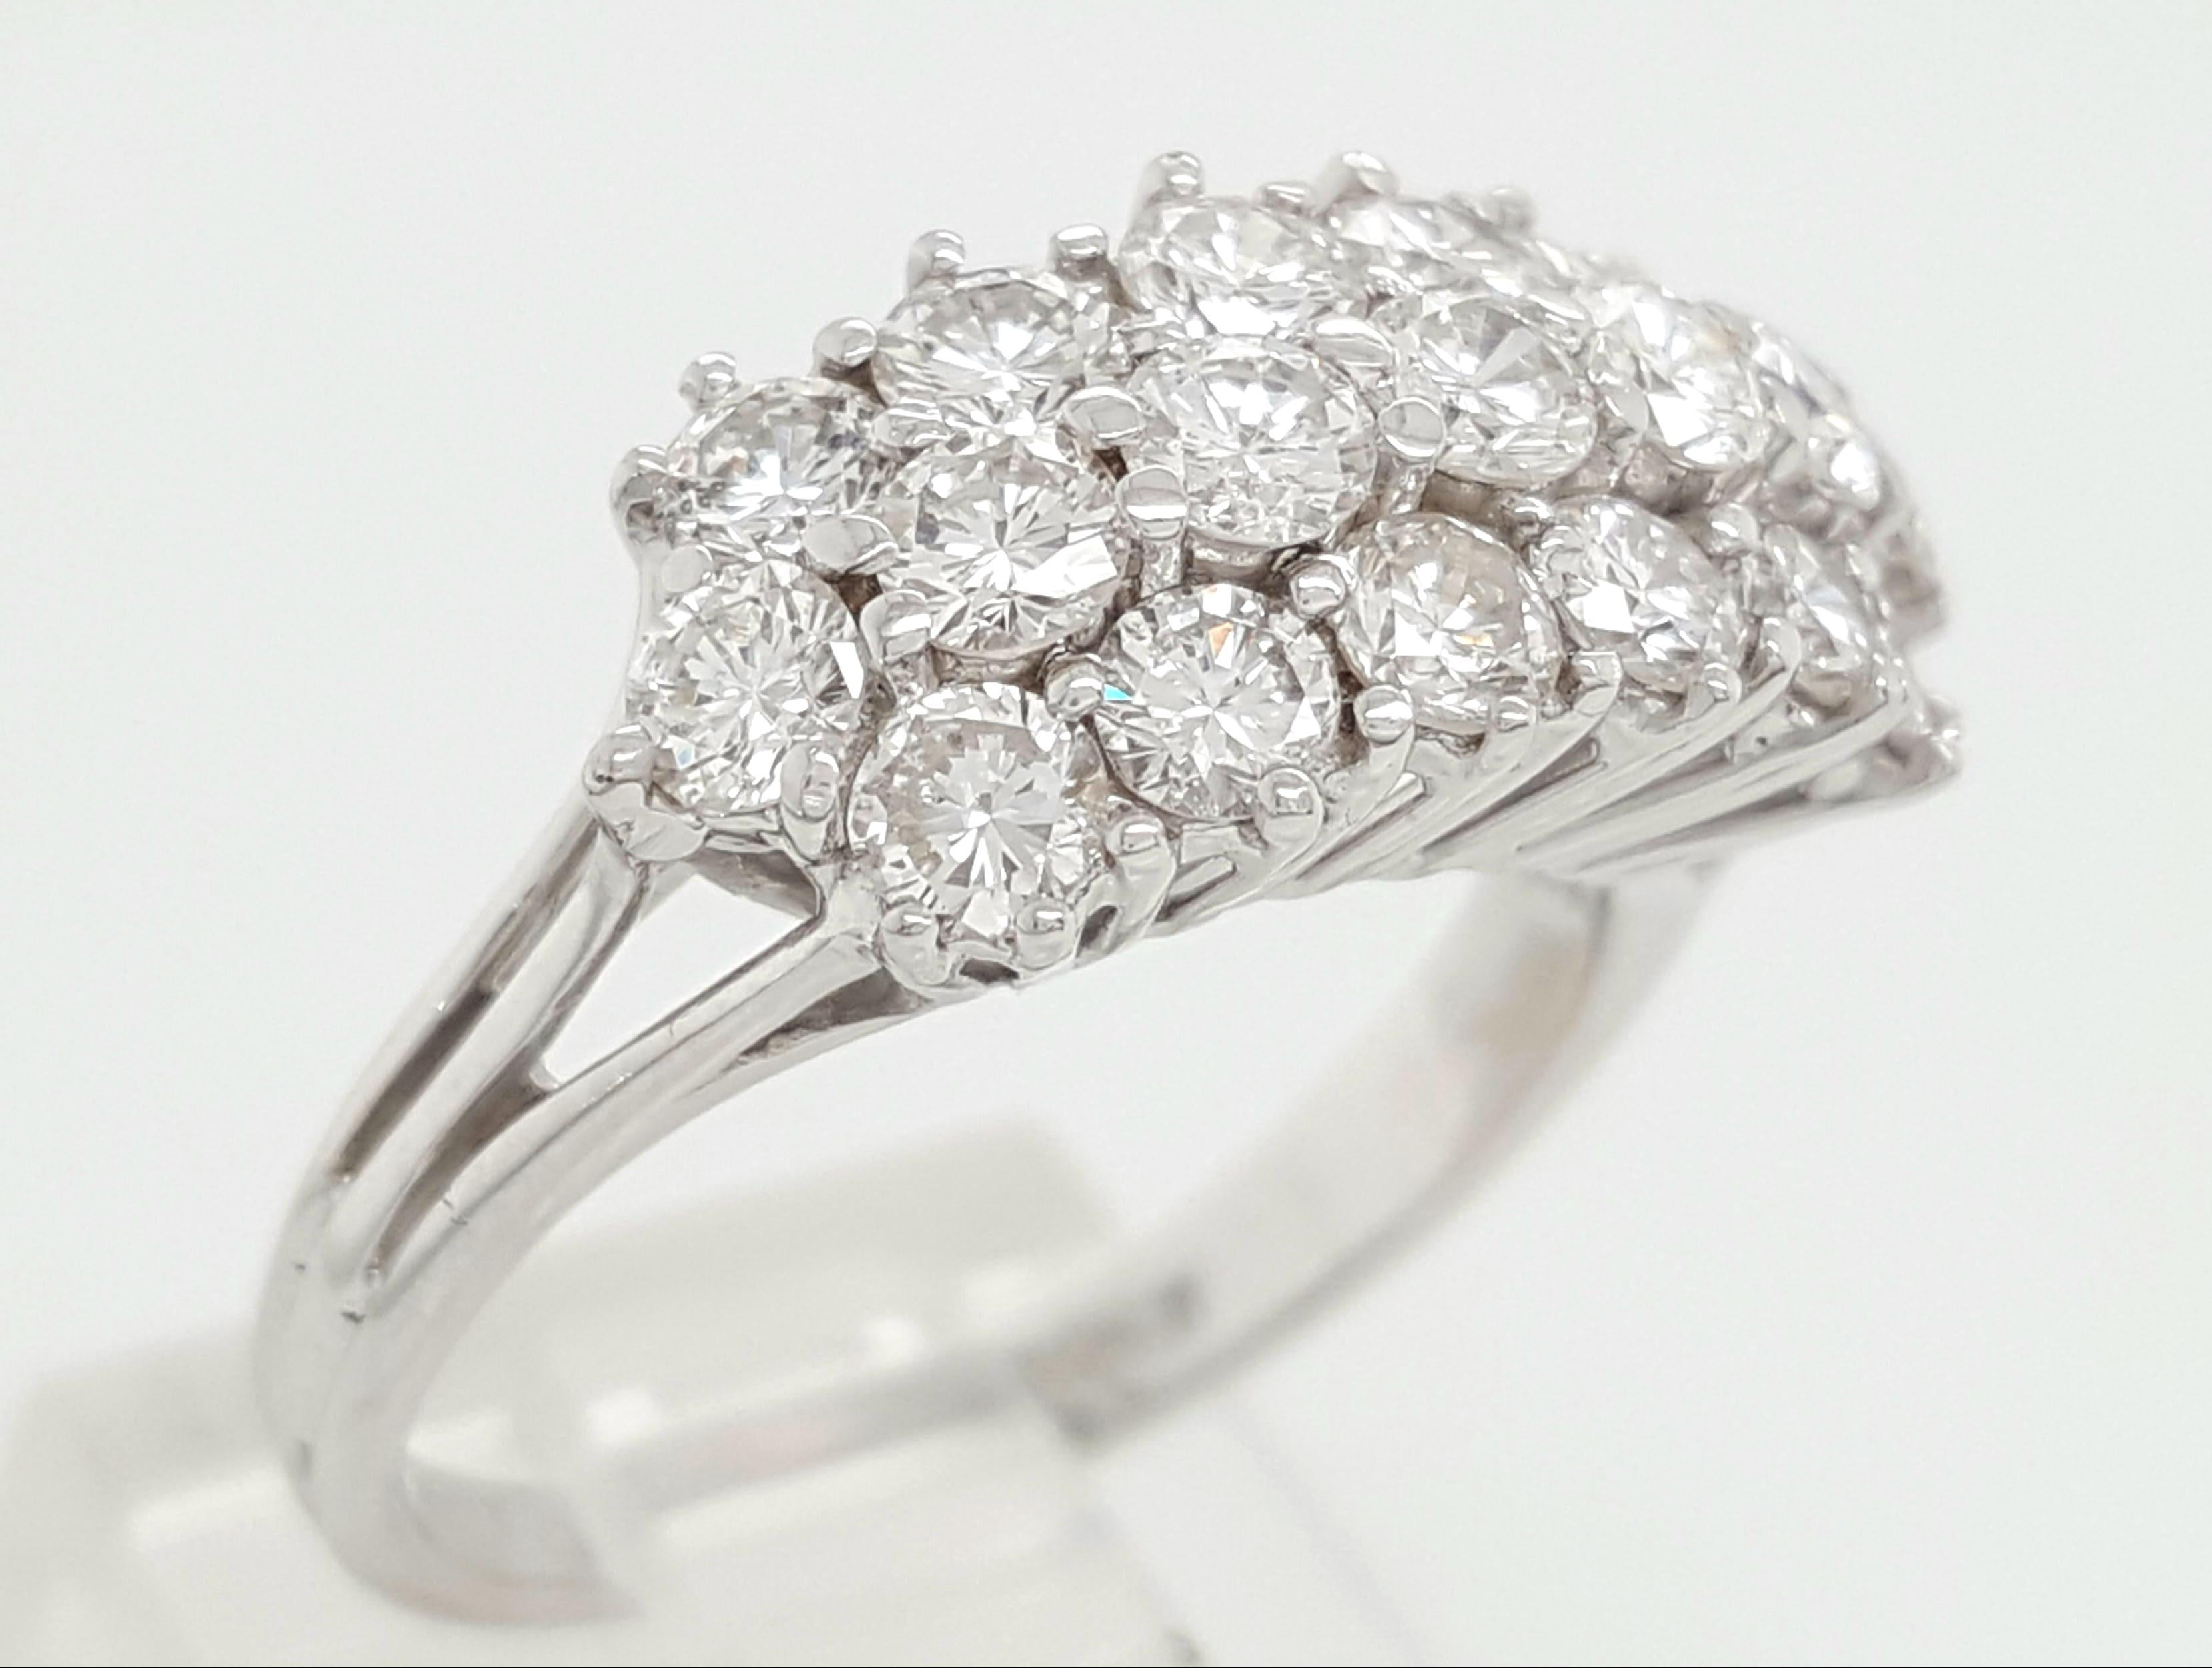 Here we have a genuine turn of the century Vintage Round Brilliant Cut diamond ring crafted in 18 karat white gold. The finishing on this ring is absolutely beautiful, the prongs hold the round cut diamonds perfectly displaying all the brilliance